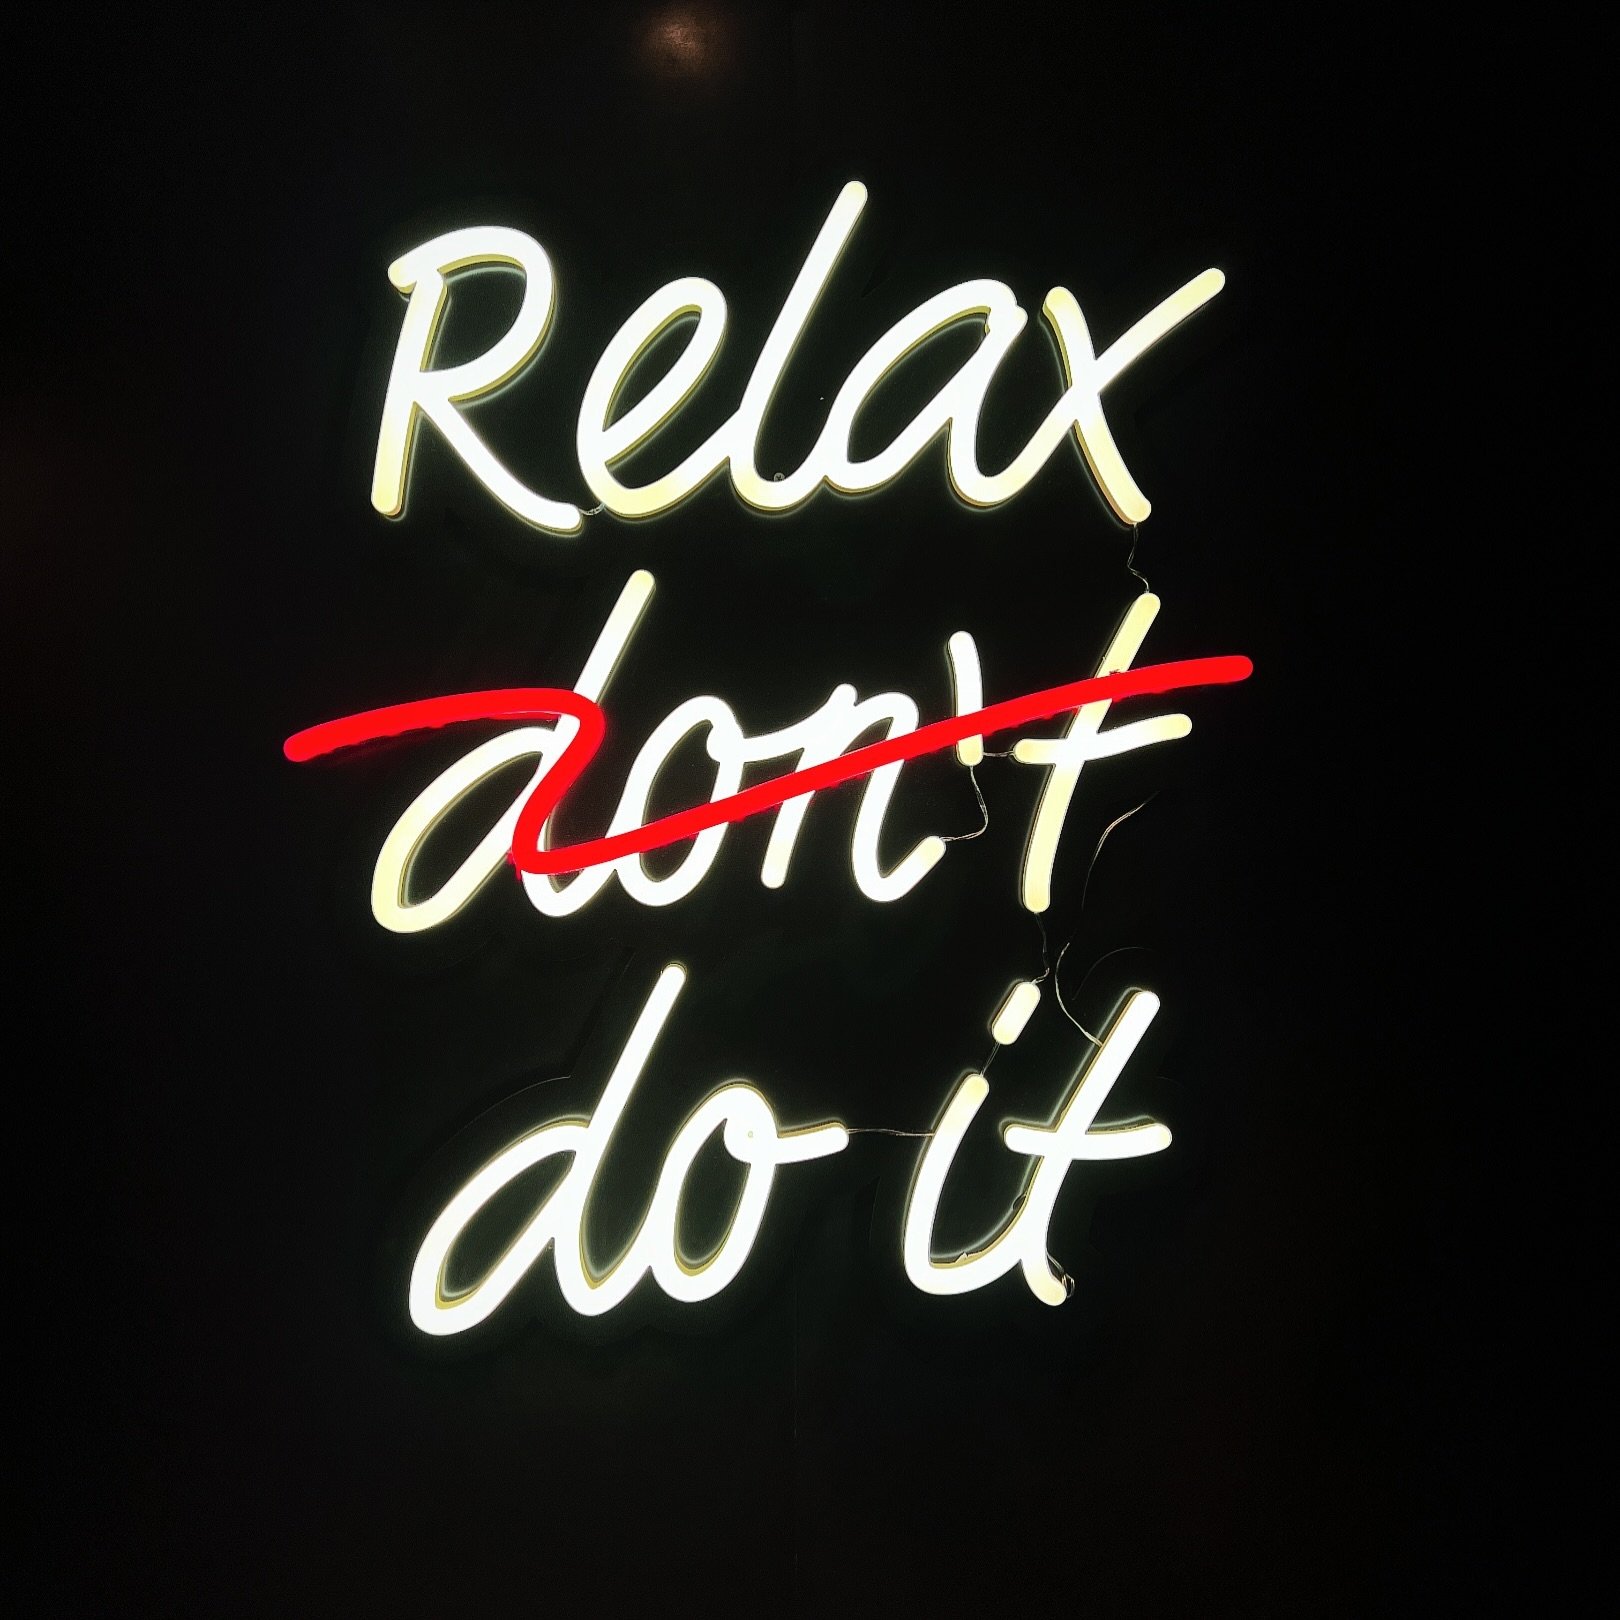 This weeks motto for all our partners, colleagues, clients &amp; friends. #moxynyc #doit #itsallaboutdoingit #studioall